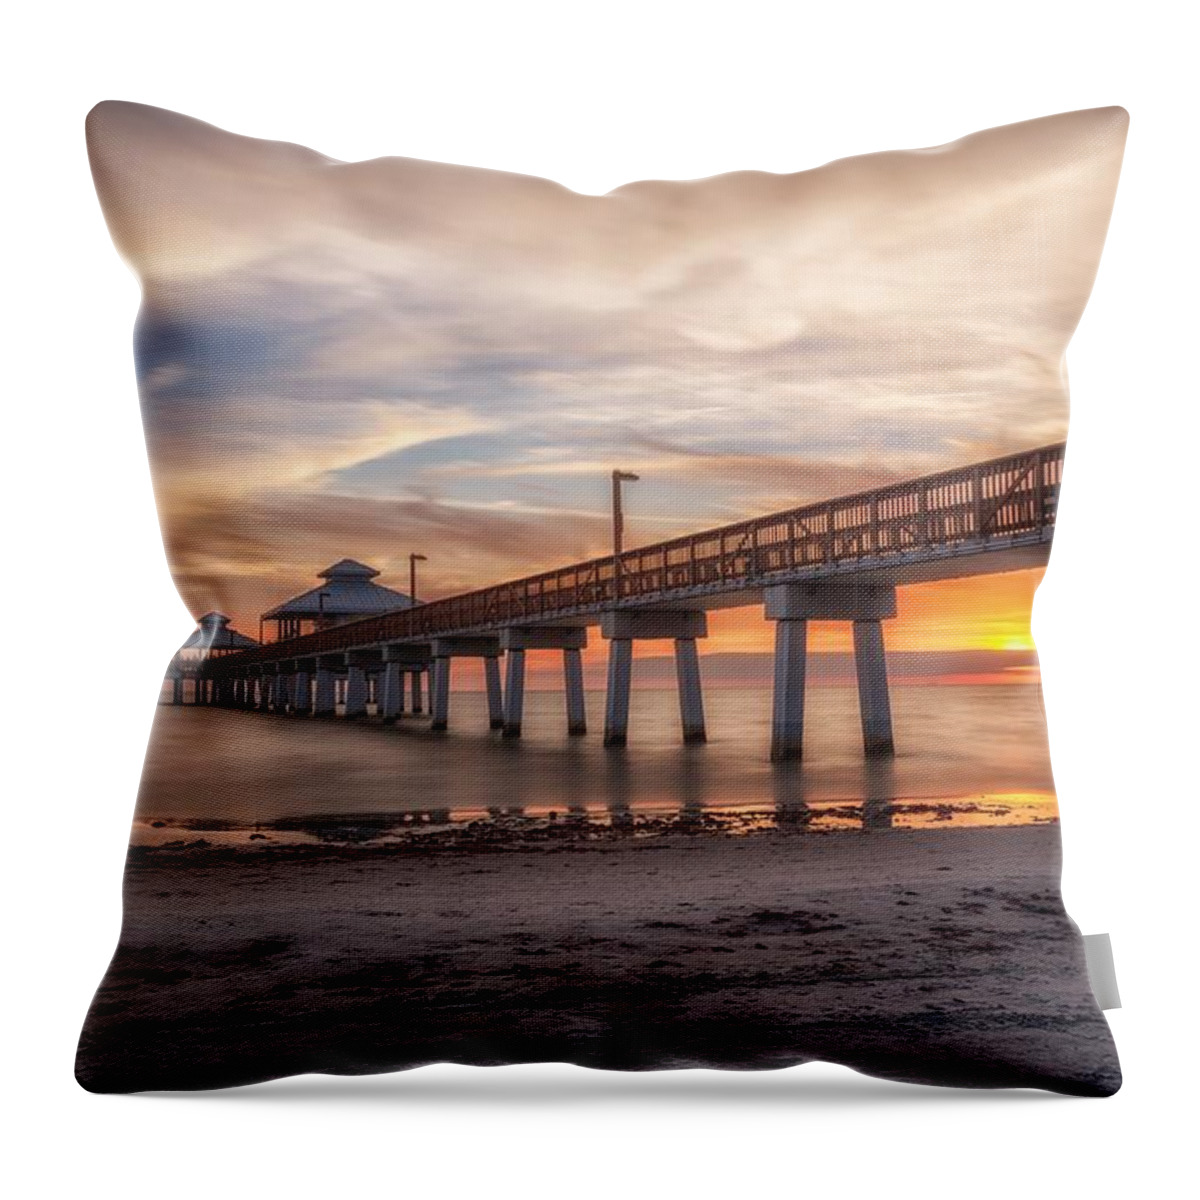 Instagram Throw Pillow featuring the photograph Sunset by Presilla 